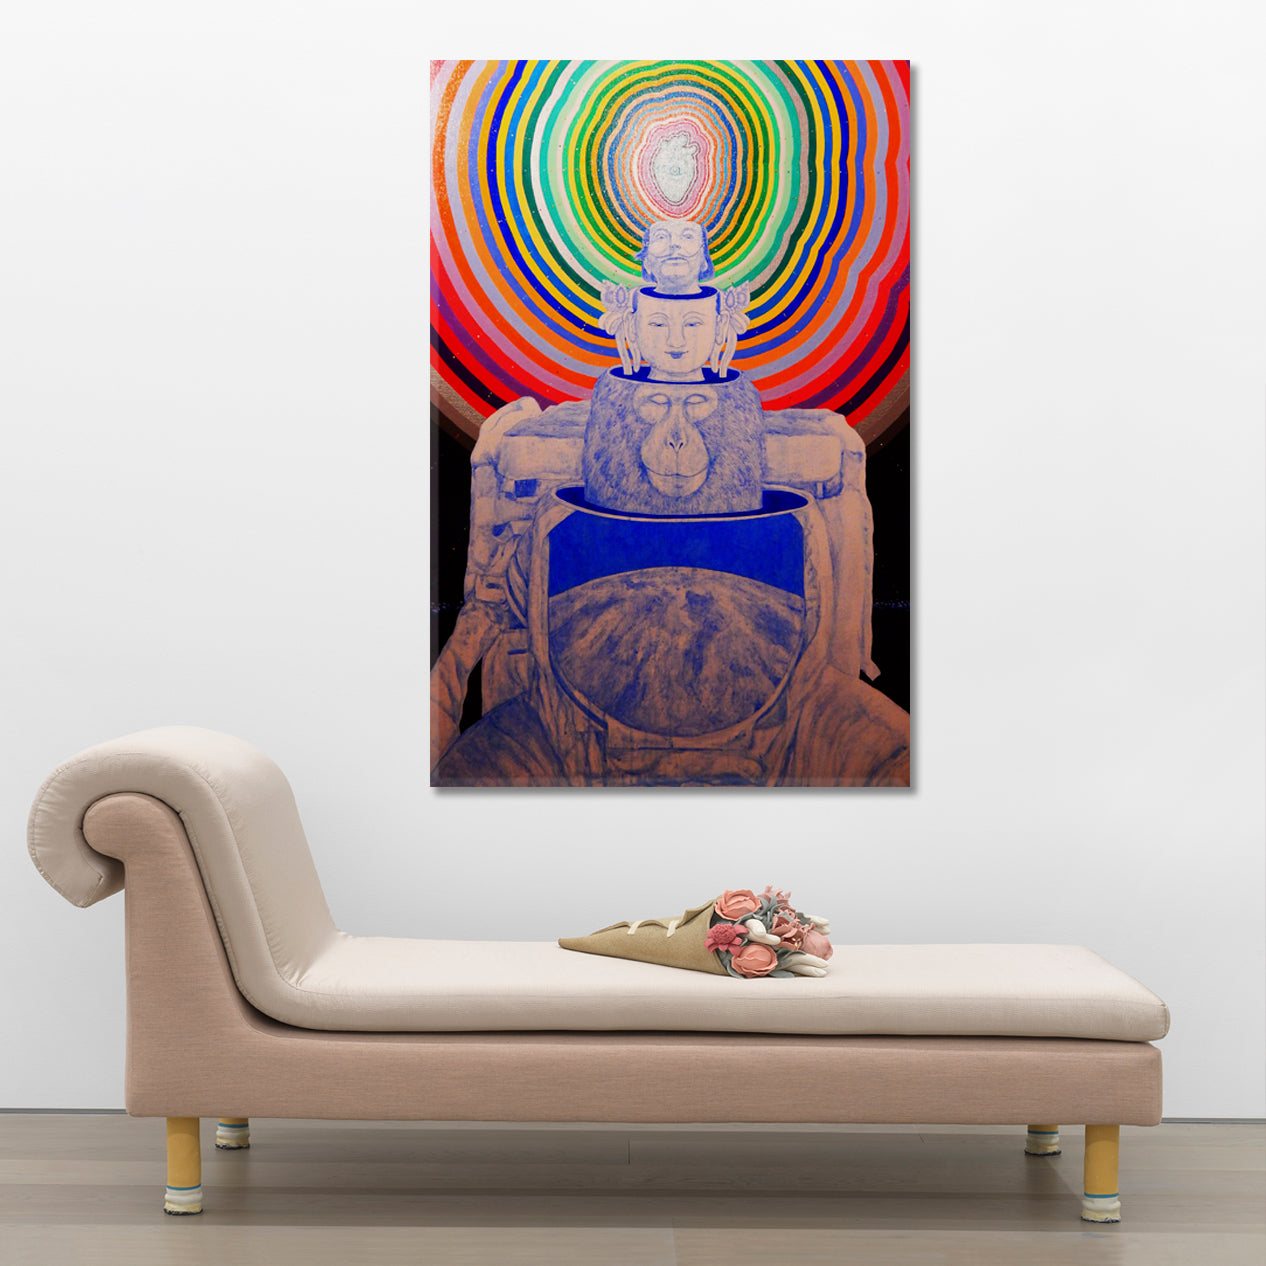 VISIONARY Vivid Psychedelic Surreal Abstract Trippy Art Surreal Fantasy Large Art Print Décor Artesty   